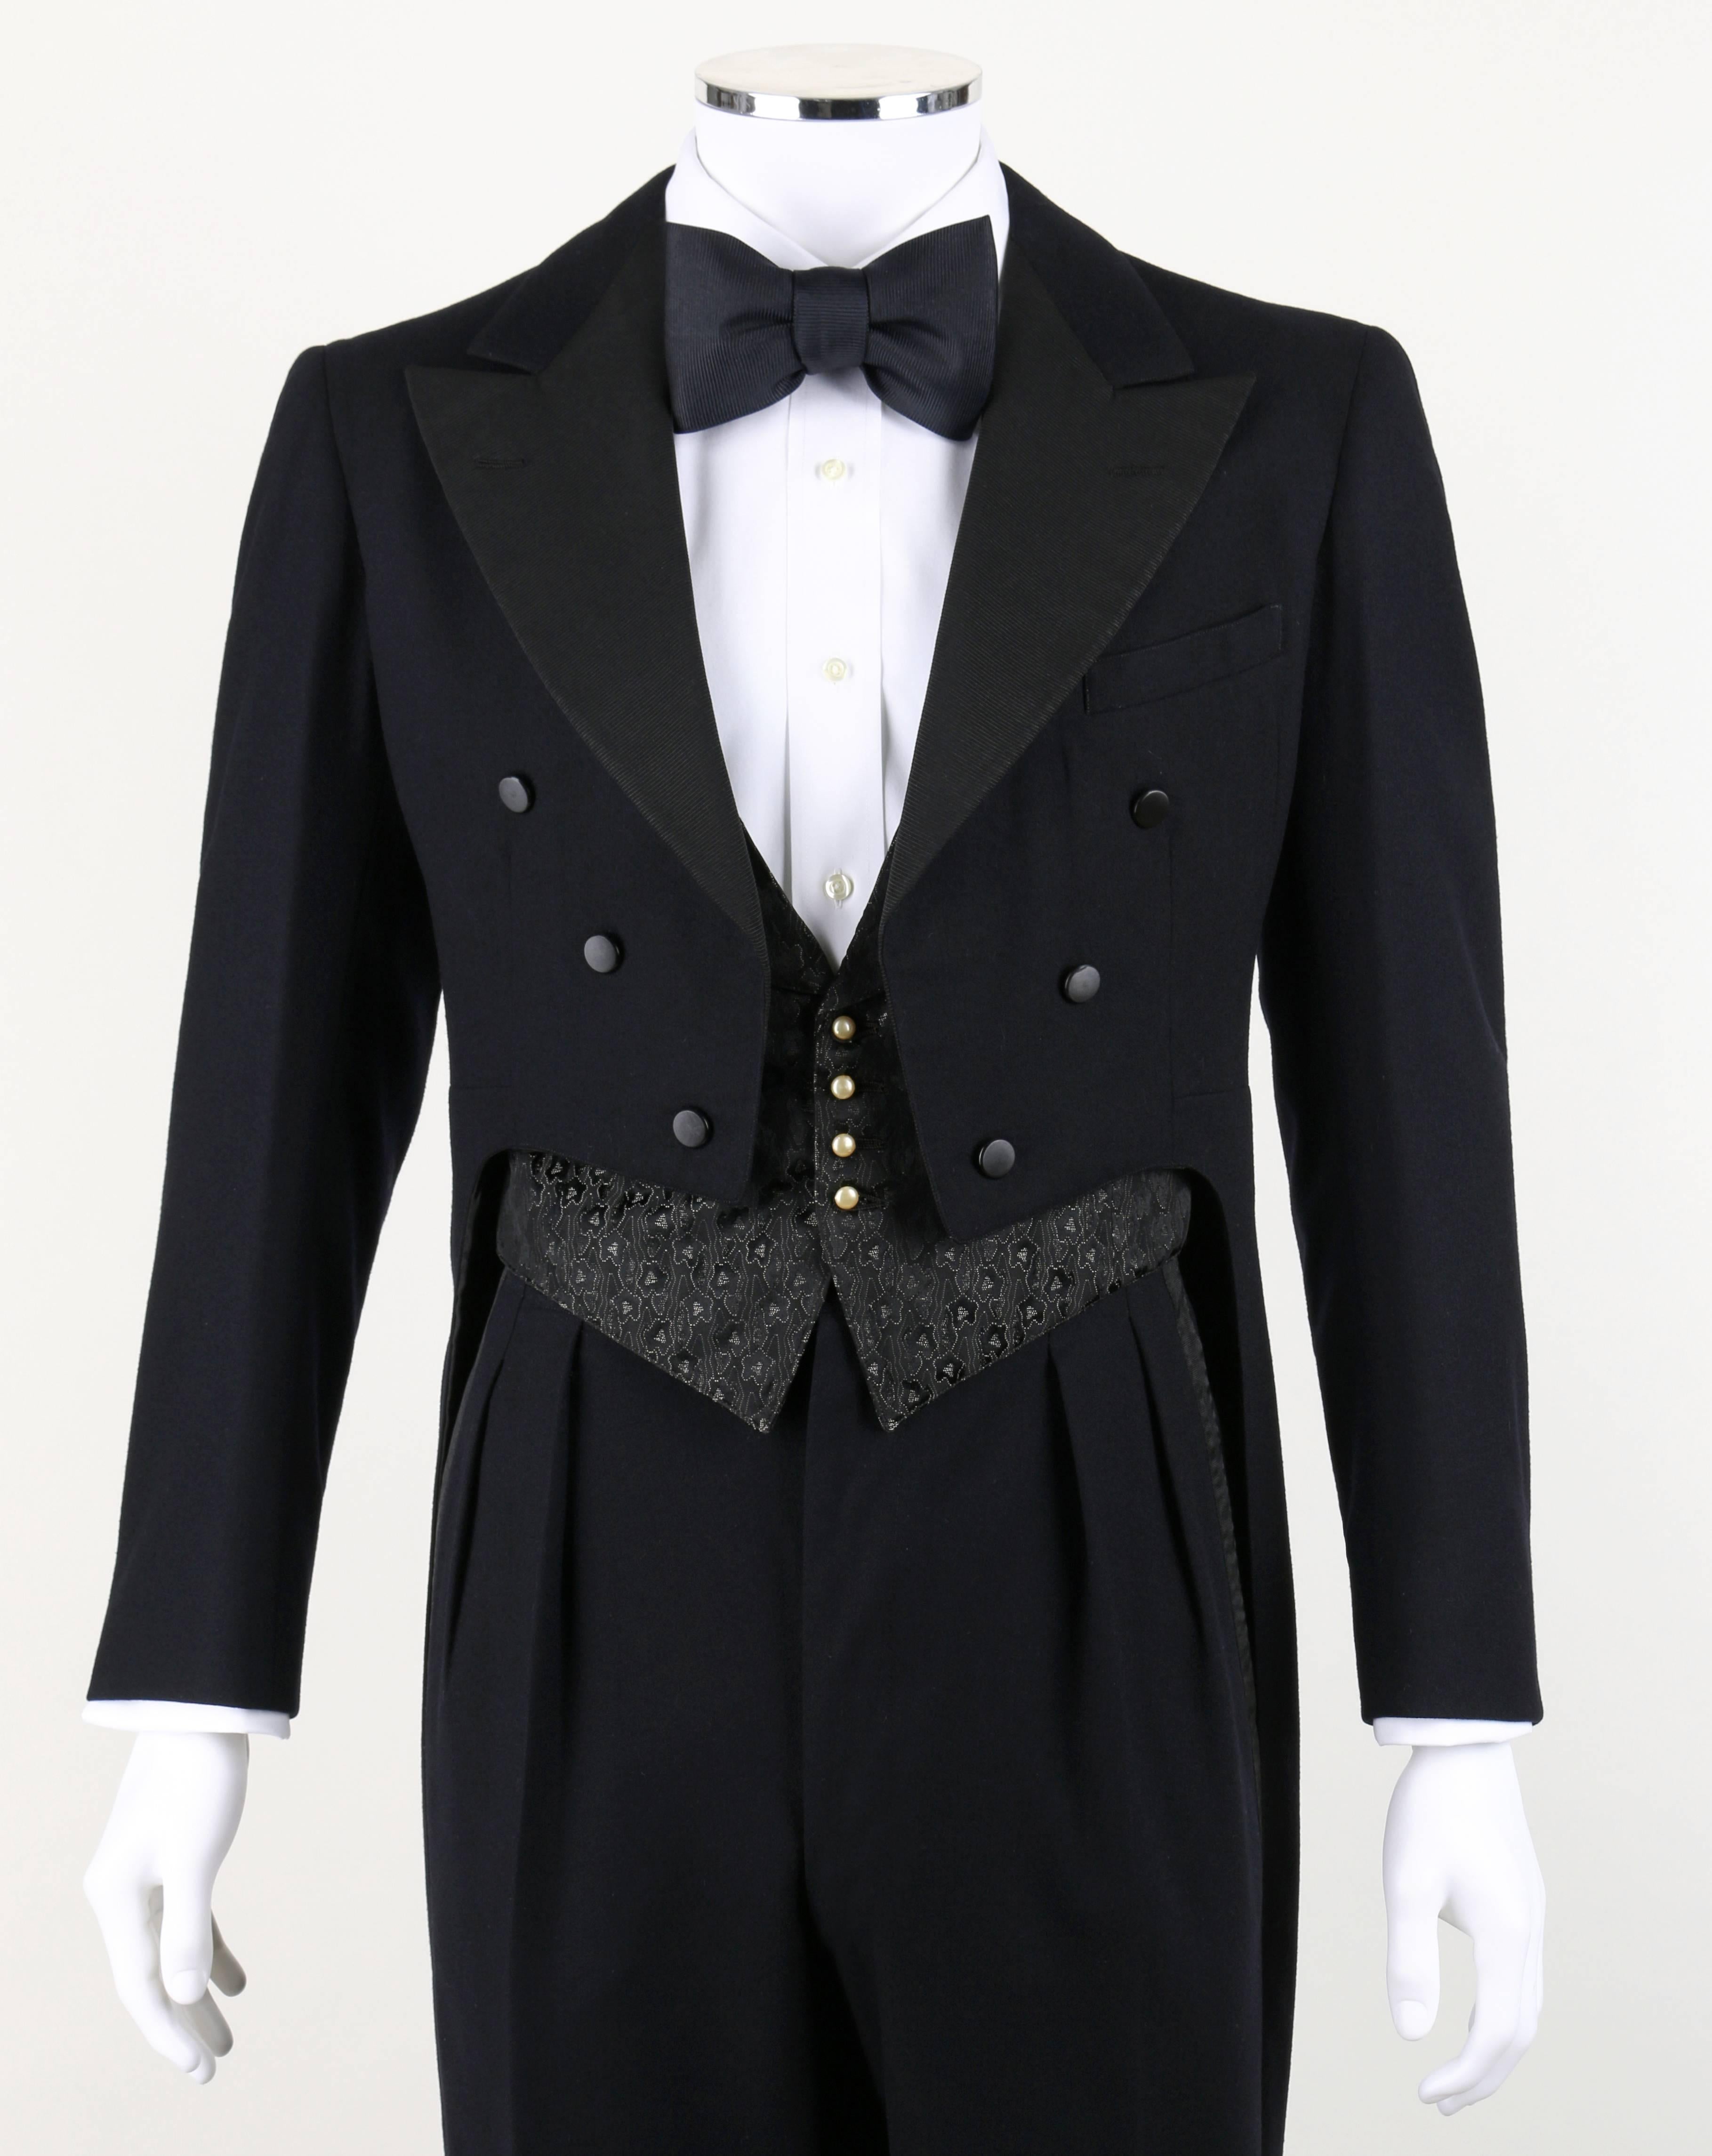 Vintage 1932 three piece formal tailcoat evening suit. Jacket and trousers were made by Moritz & Winter and waistcoat by Anderson & Fritzell, both of Milwaukee. Waistcoat is dated August 1932 in an interior pocket. Jacket and trousers are made of